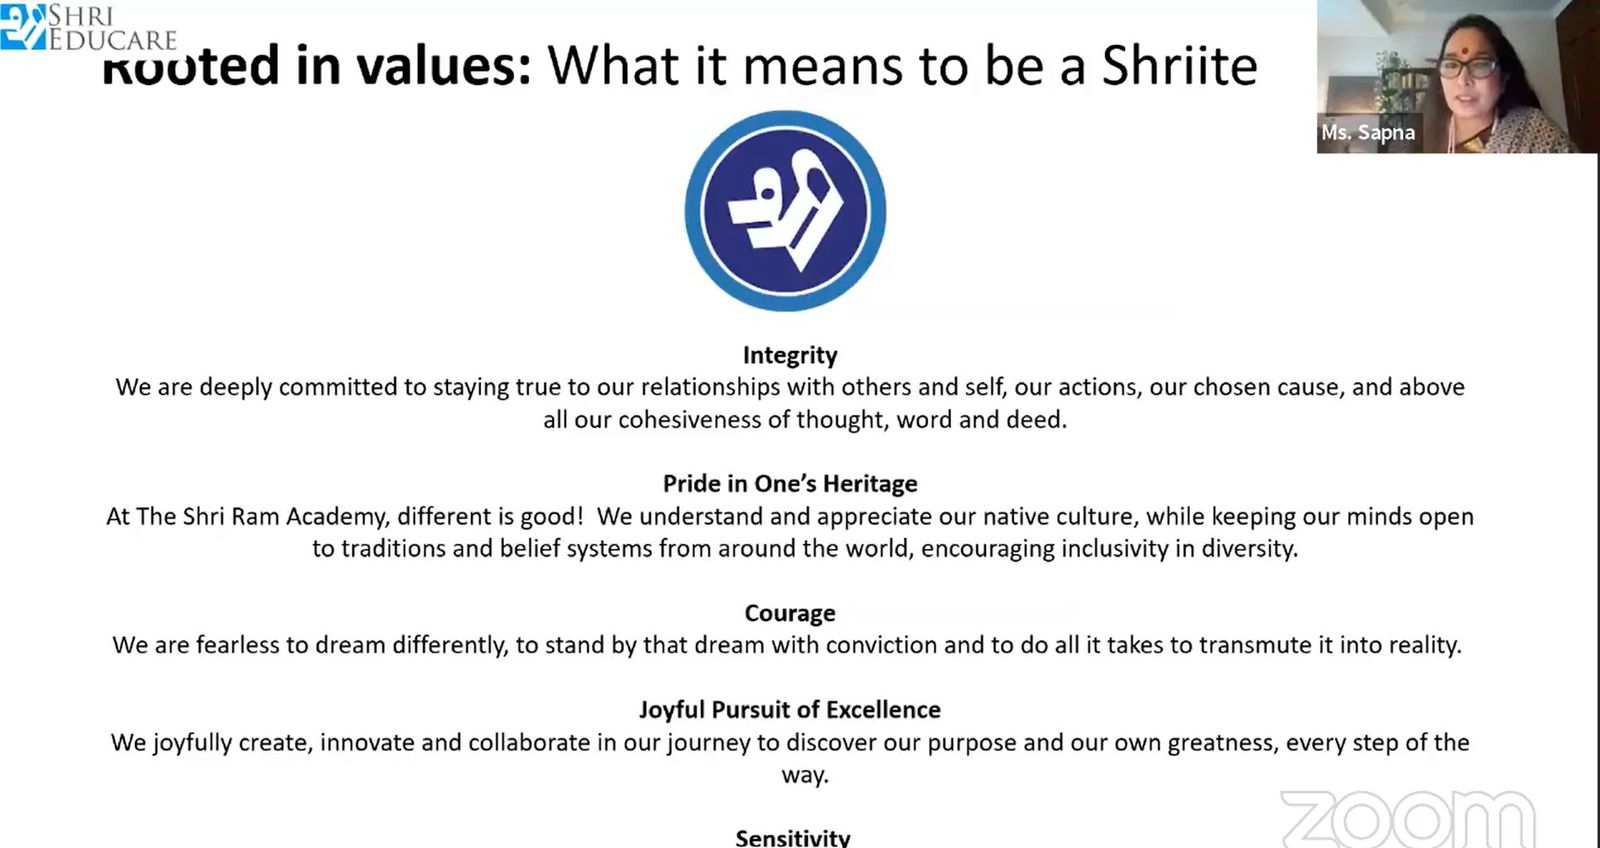 What it means to be Shriite